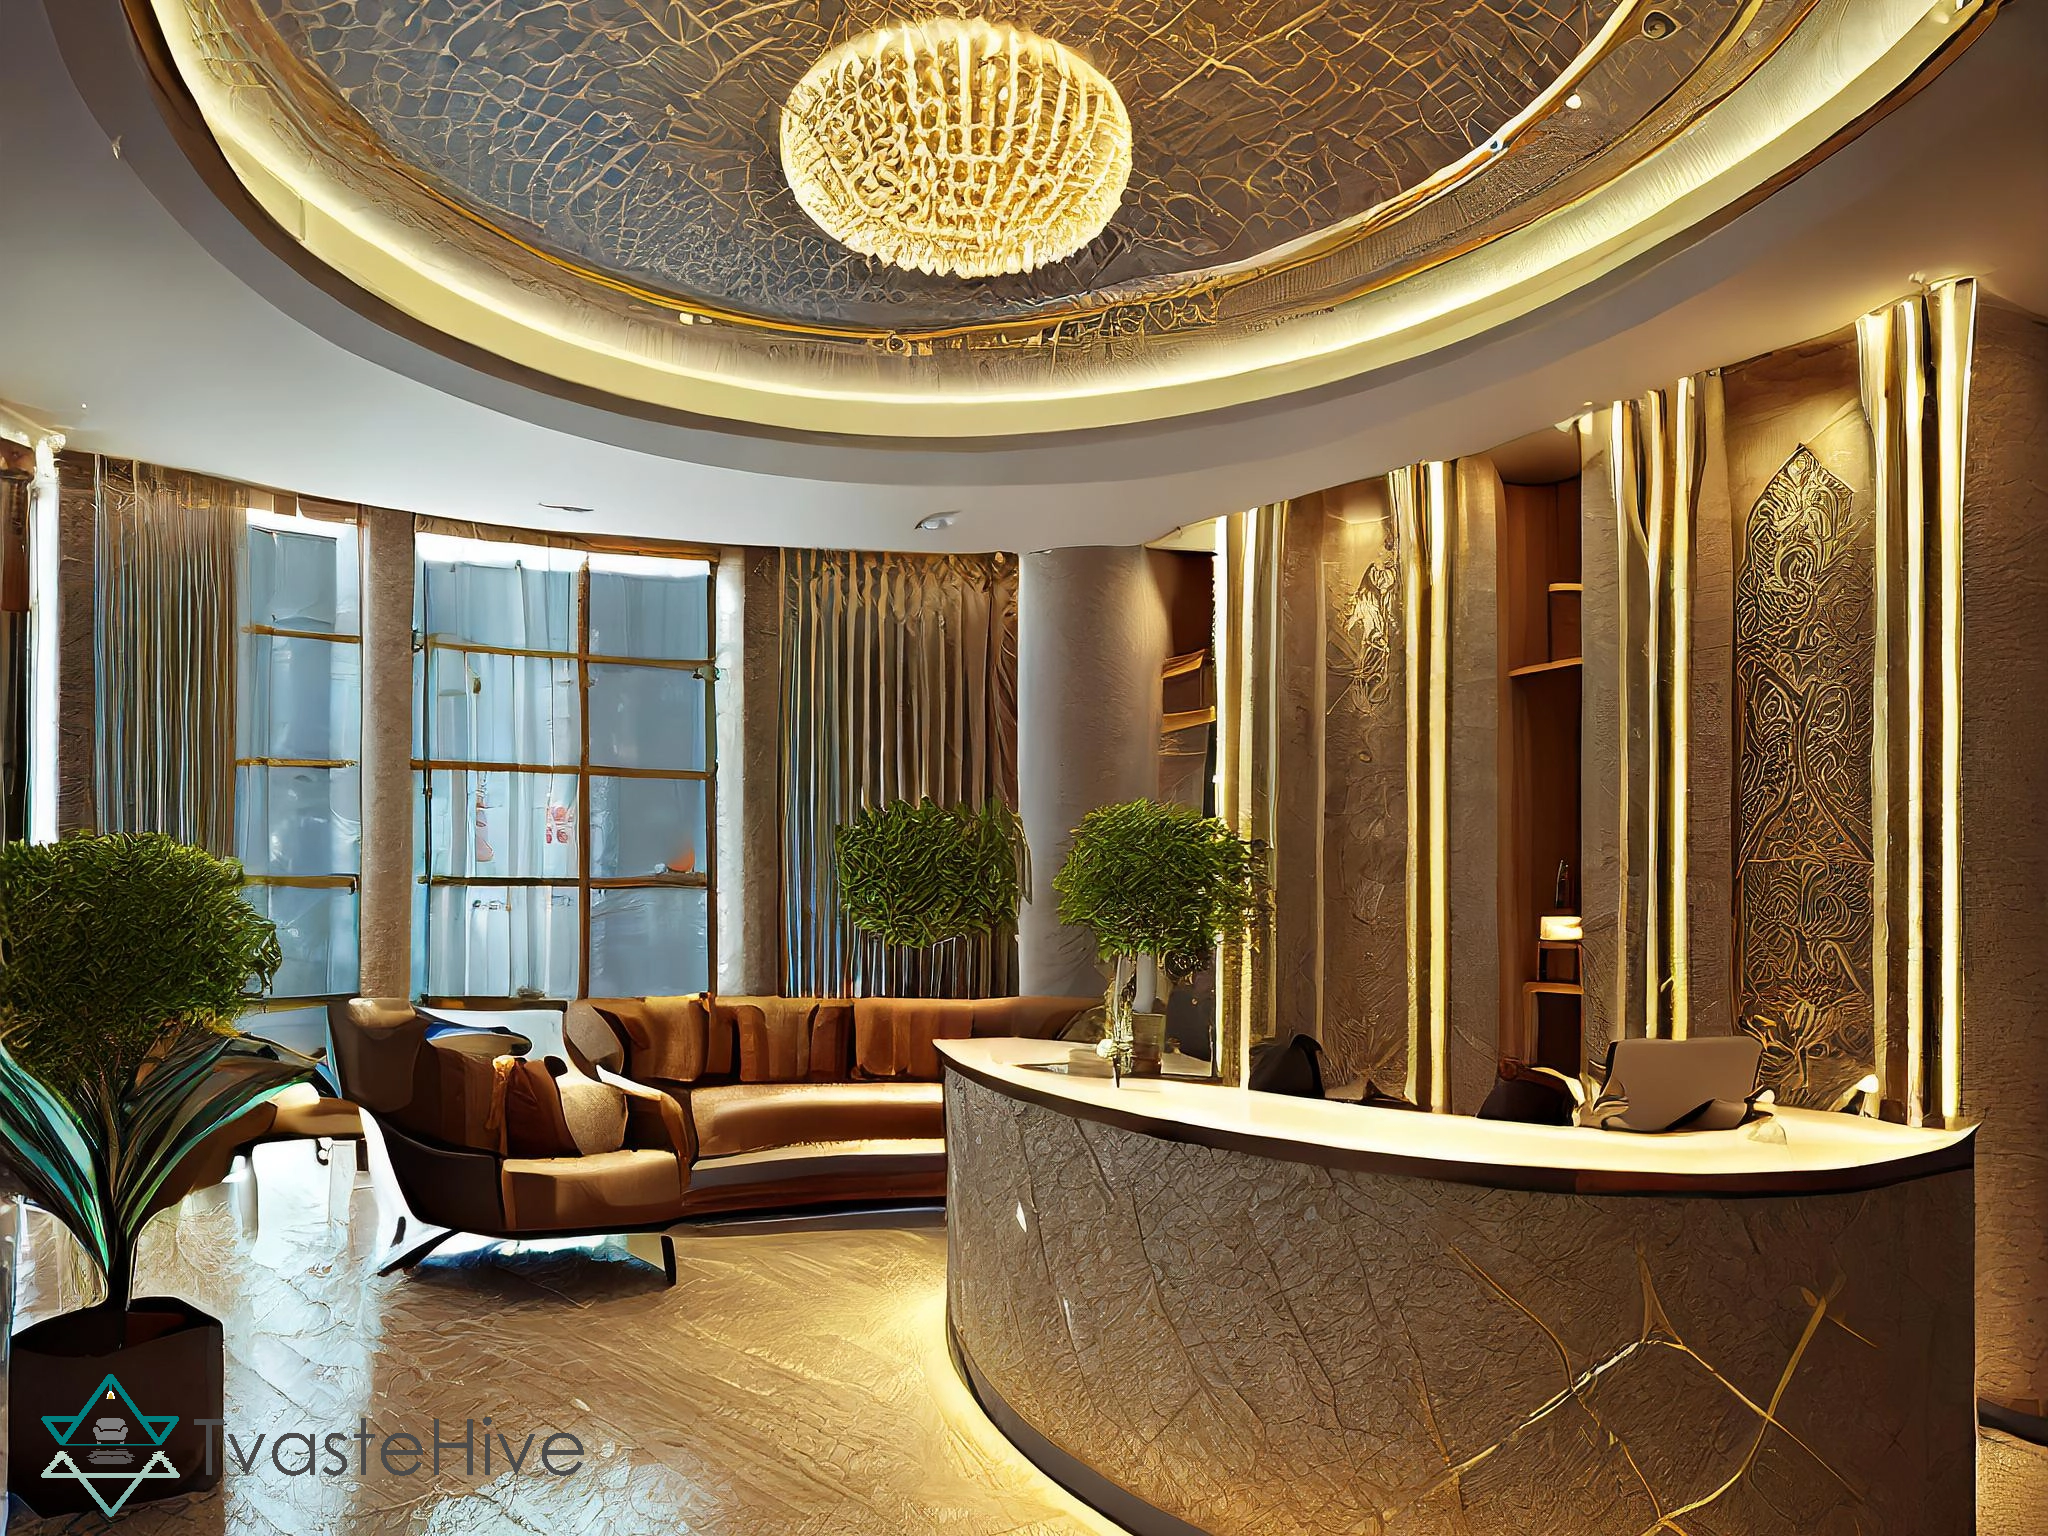 A modern office lobby with a crystal chandelier hanging from the high ceiling.